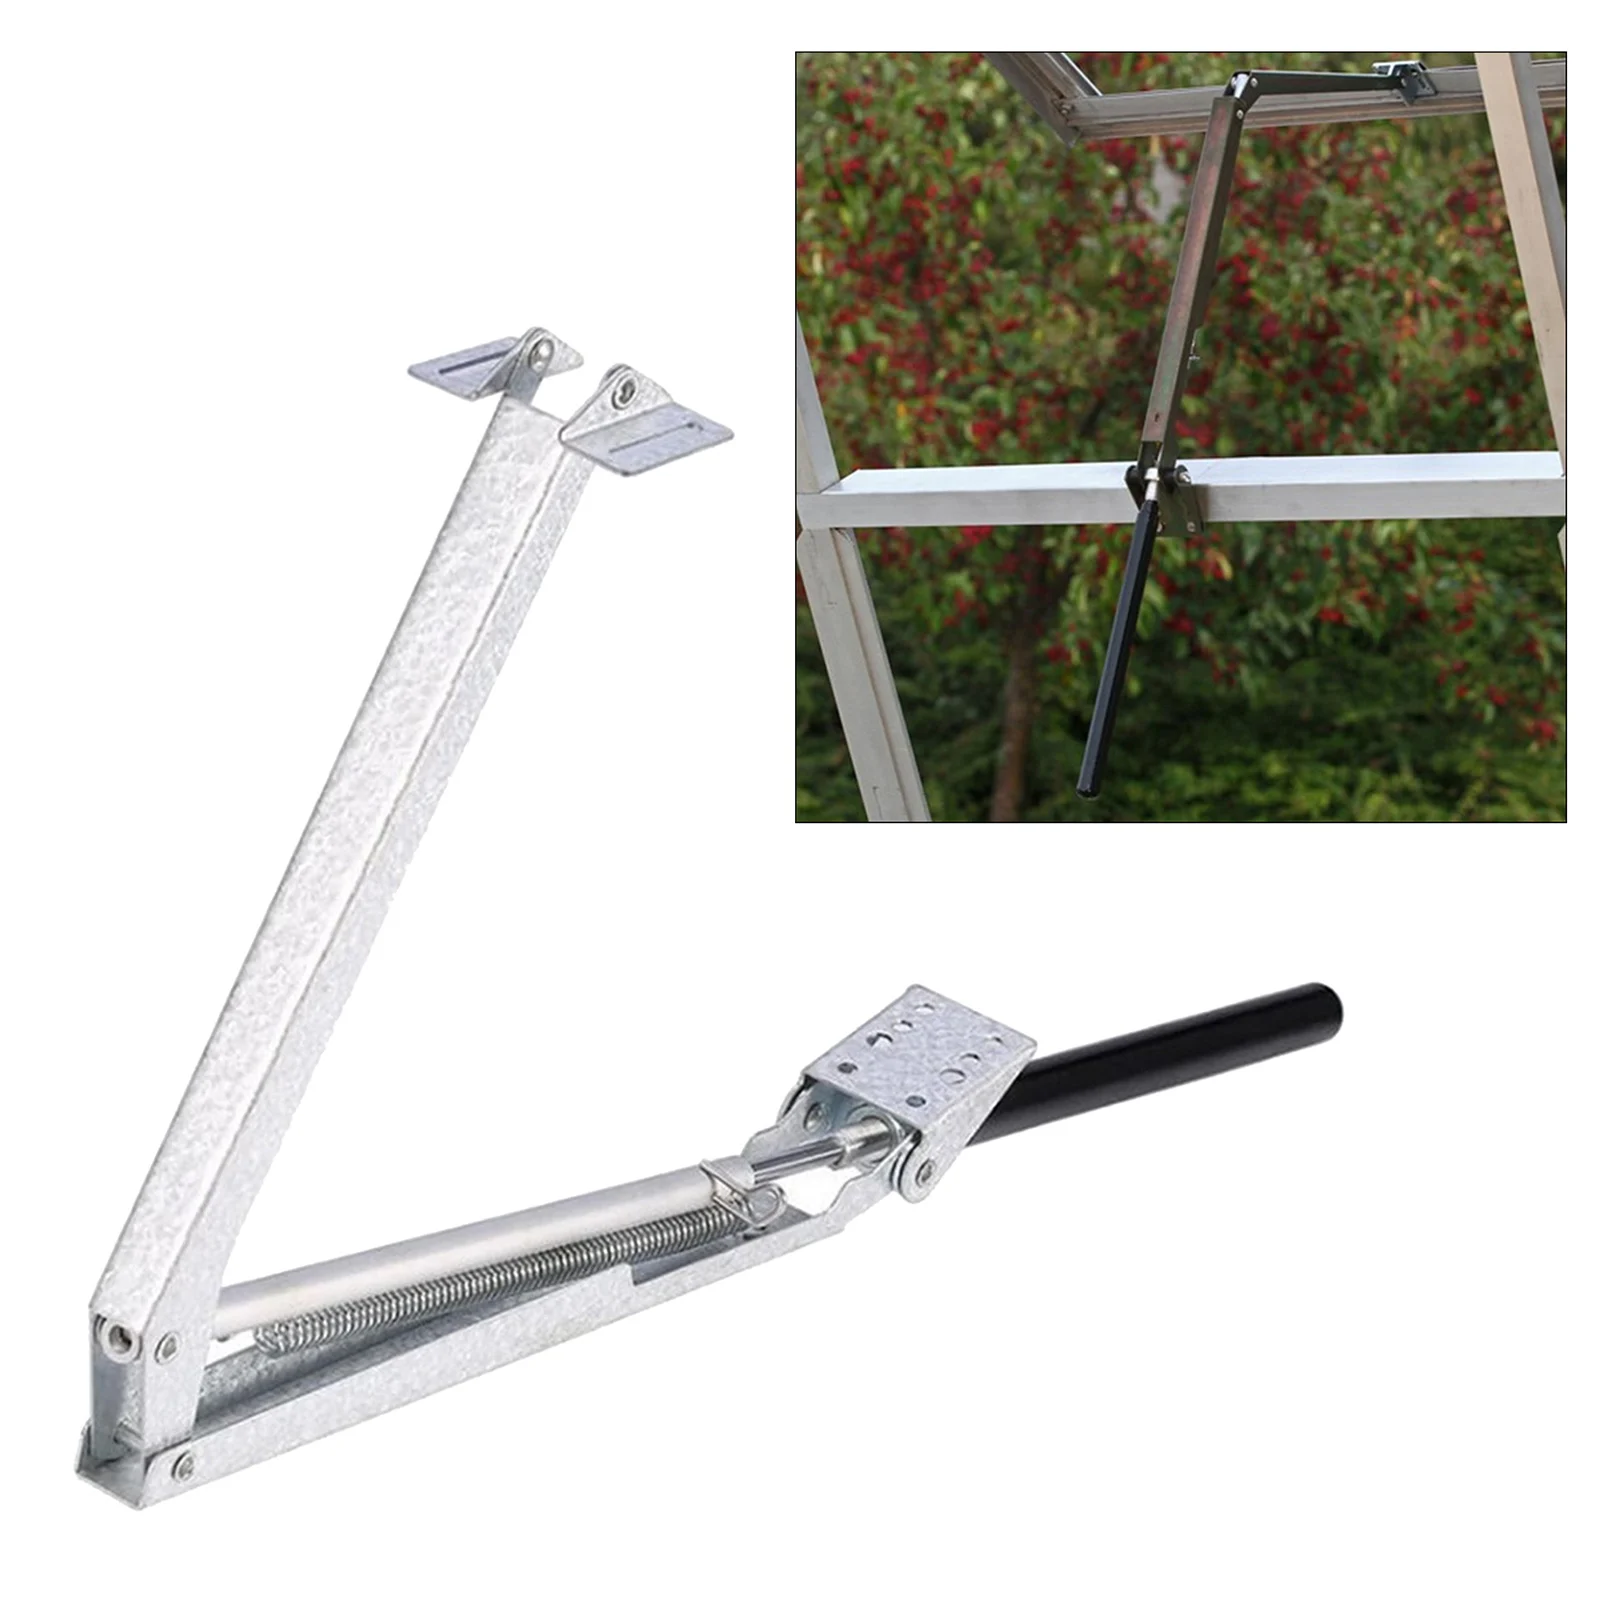 Automatic Greenhouse Window Opener Adjustable Auto Vent Opener Lifts 7-15kg